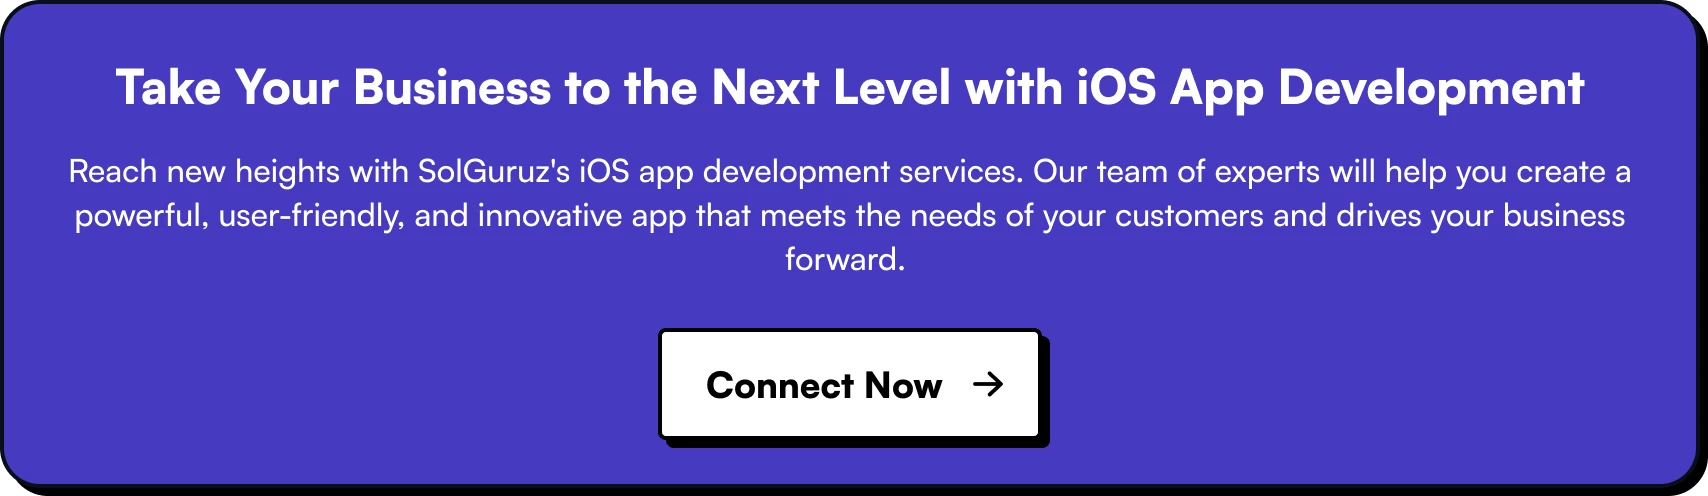 Take Your Business to the Next Level with iOS App Development Trends